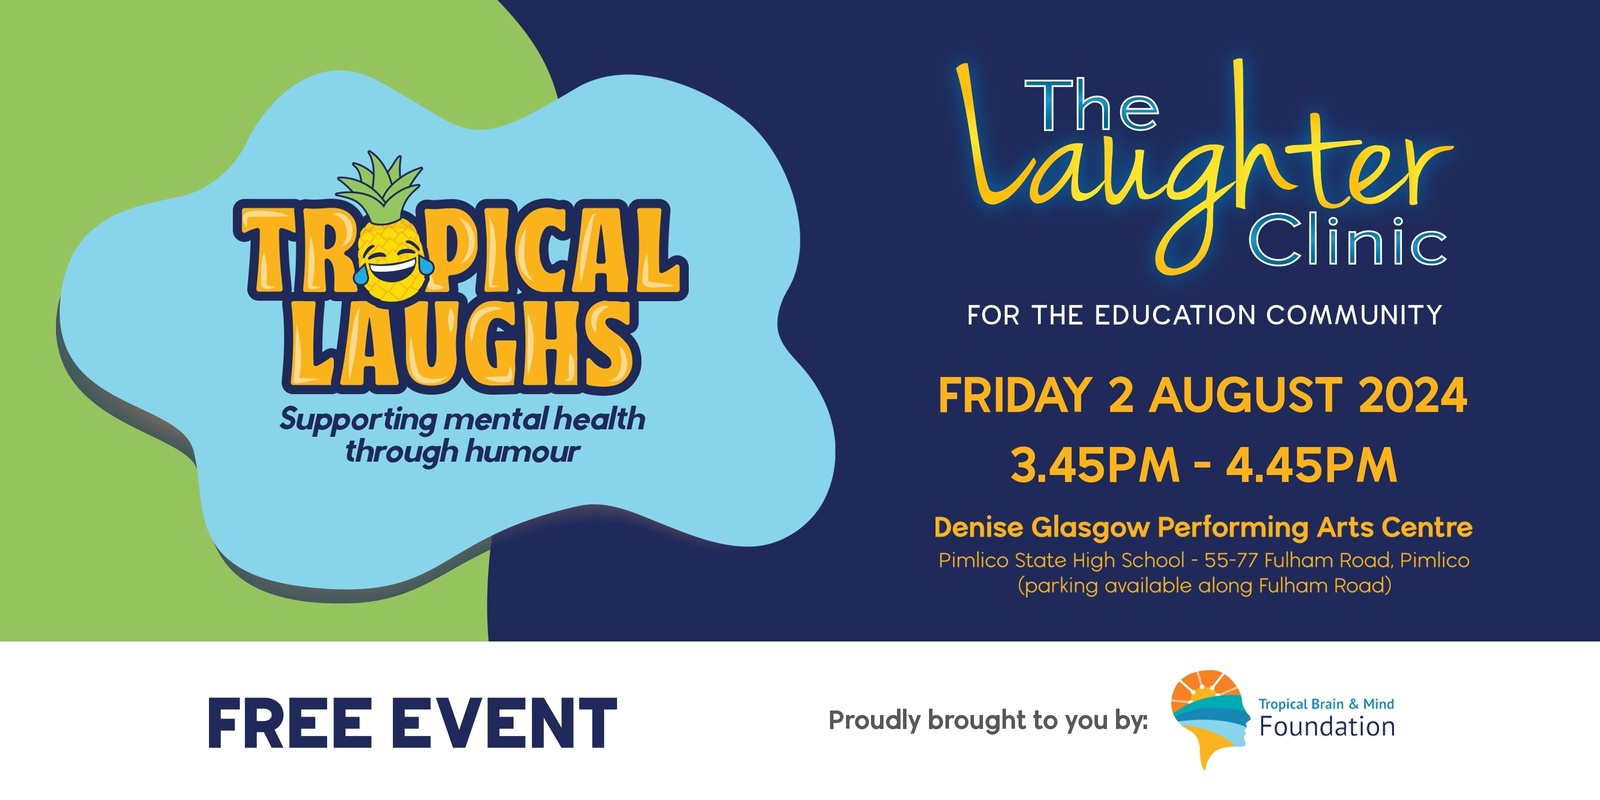 Banner image for Tropical Laughs - The Laughter Clinic for Education Community